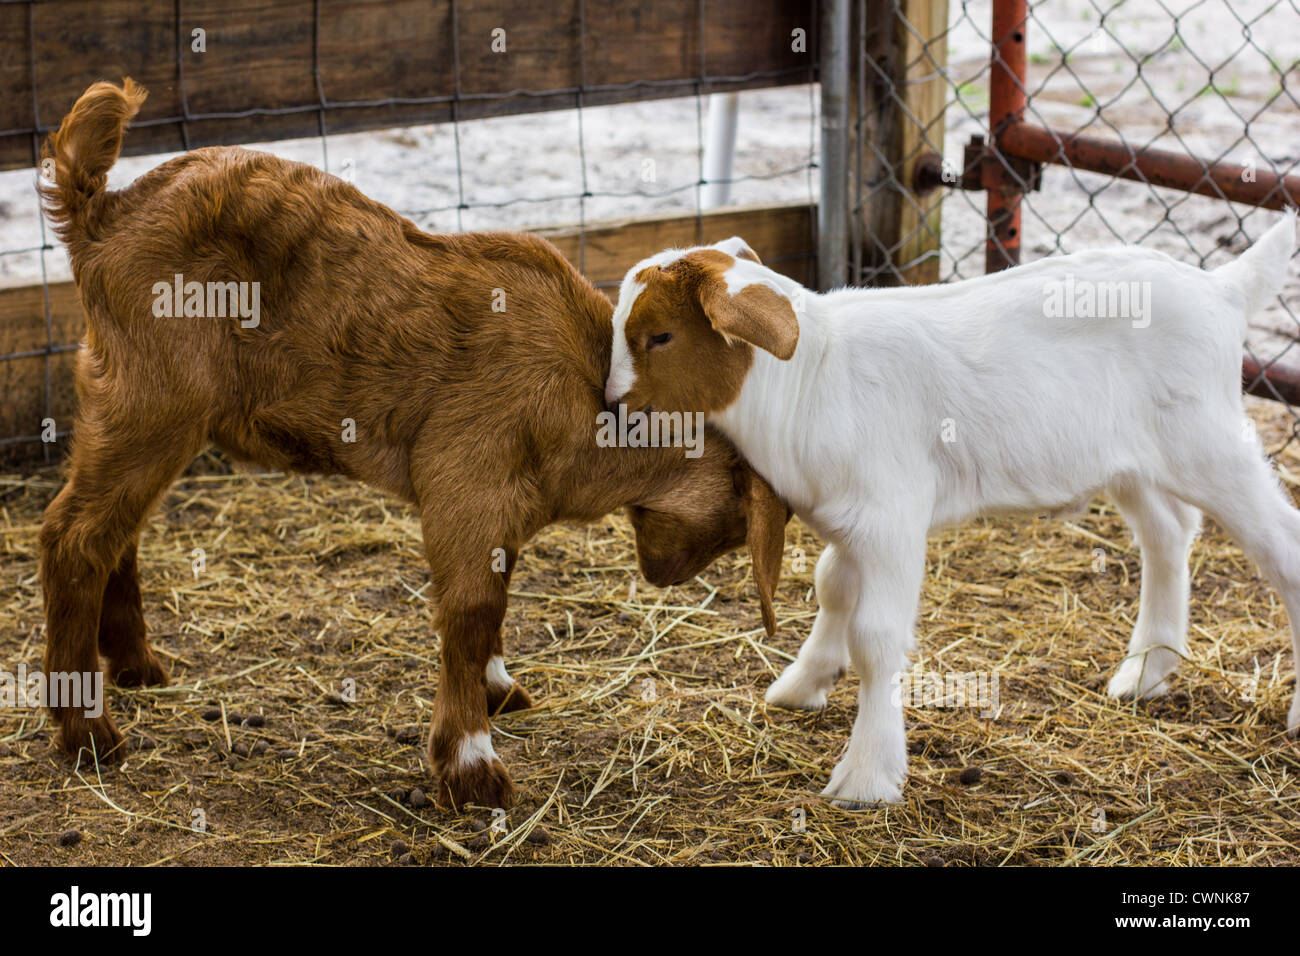 Young goats play together in paddock Stock Photo